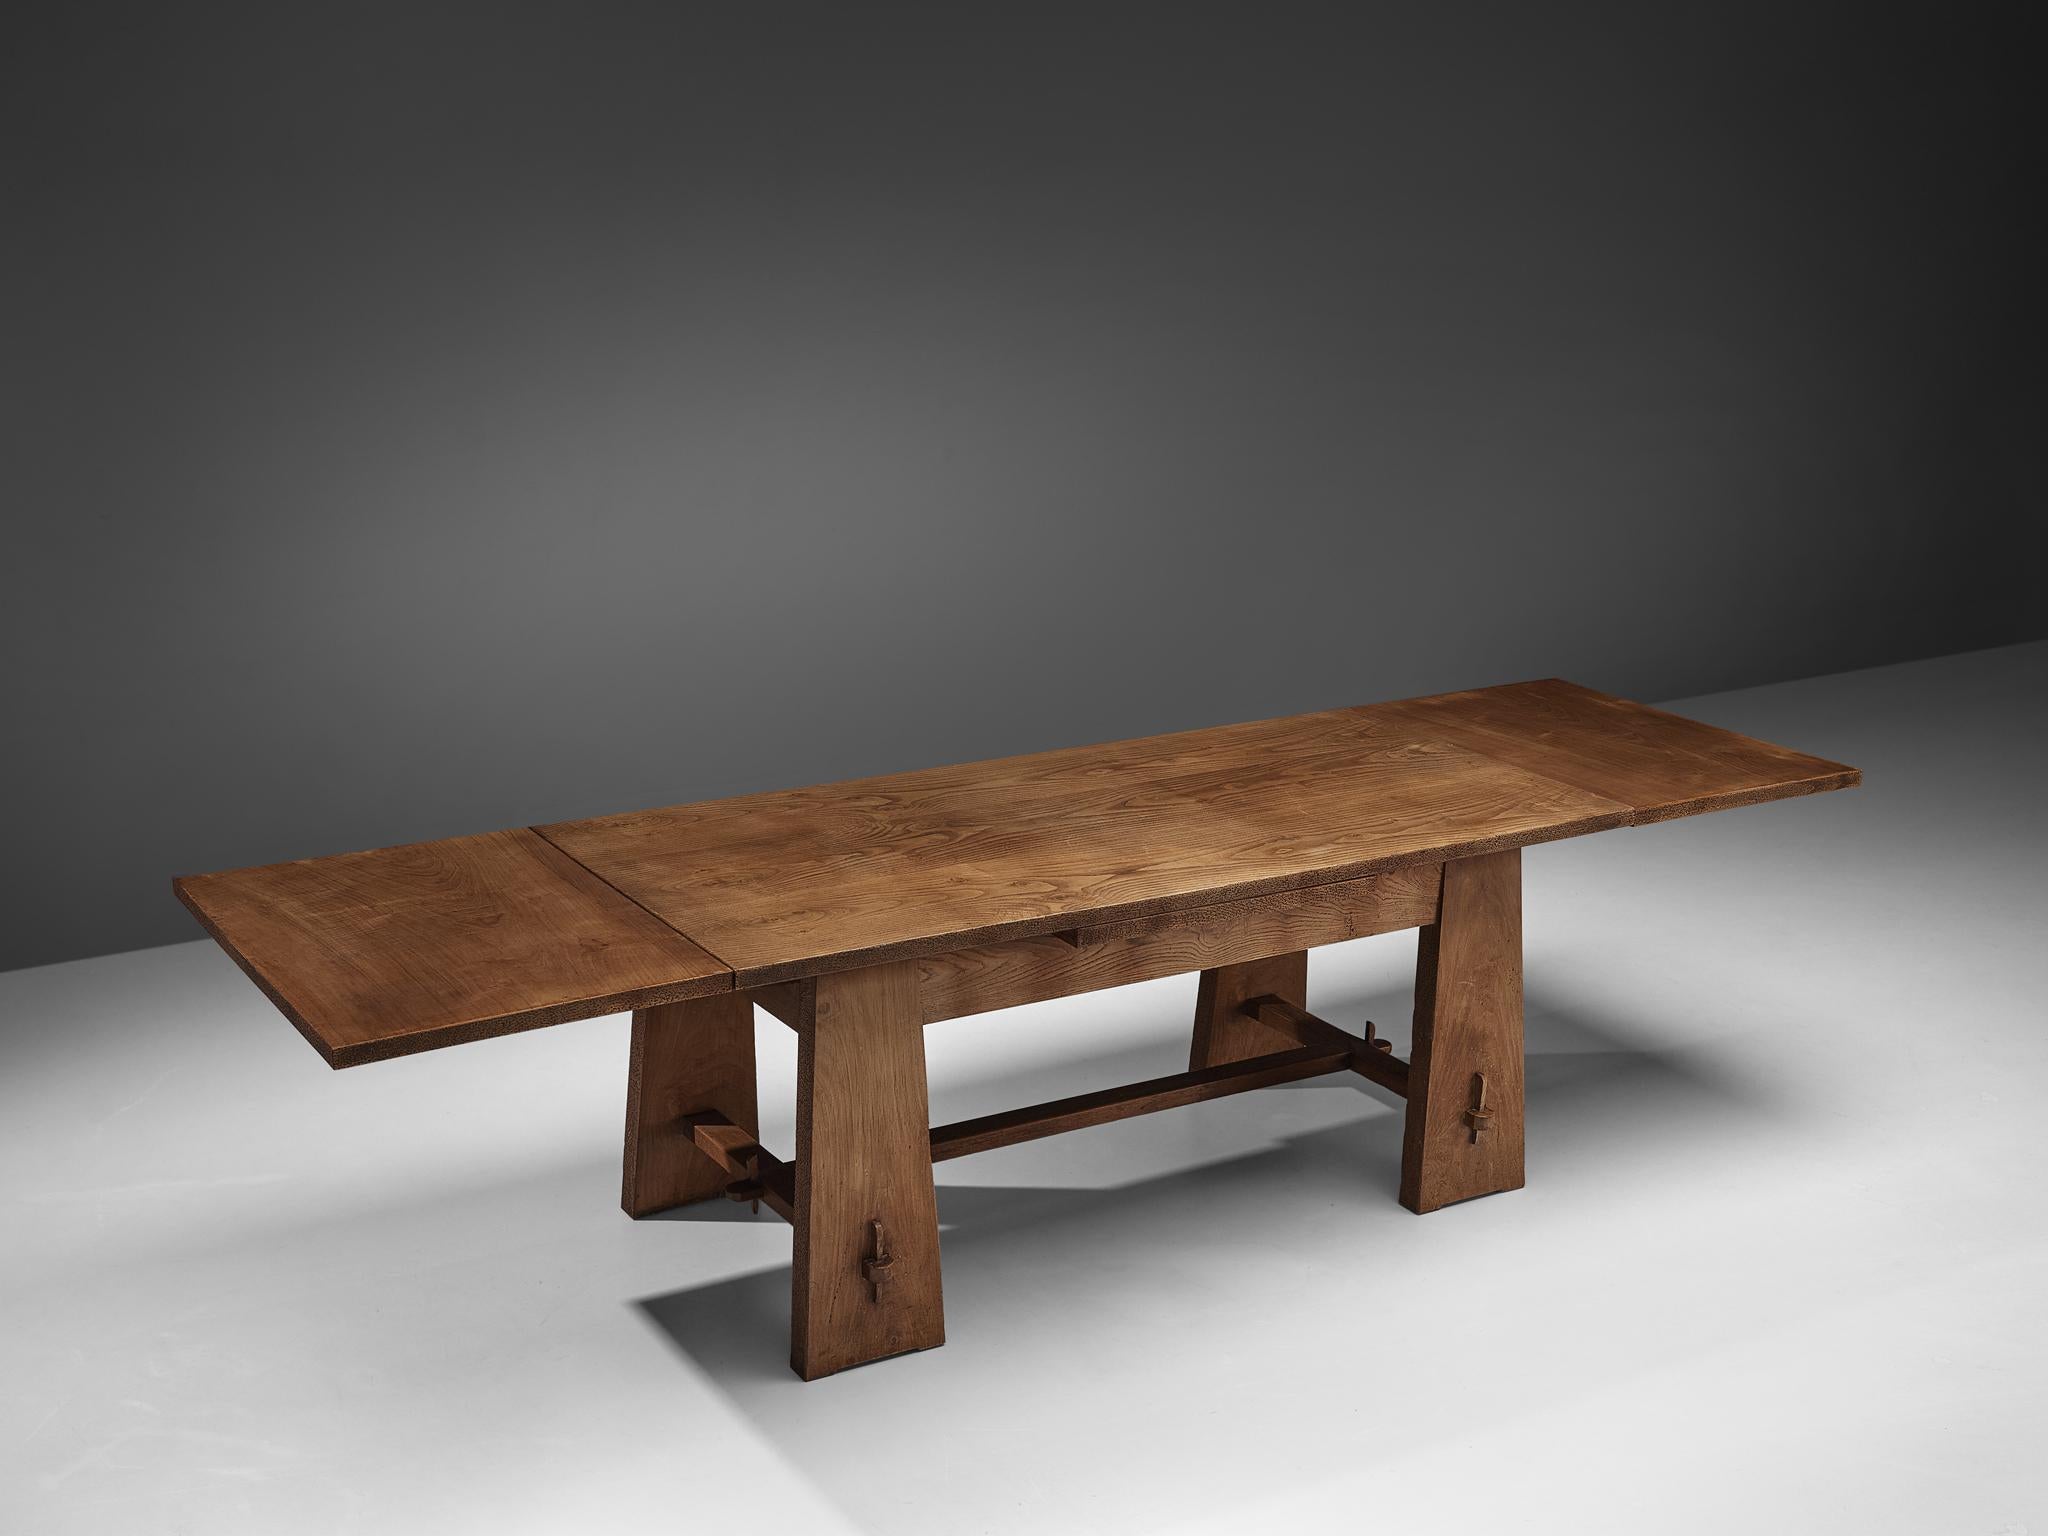 Ernesto Valabrega, dining table, oak veneer, wood, Italy, ca. 1935

This extendable dining table features two leaves that are 'hidden' under the tabletop. The leaves can be used to extend the table on one or both sides. Four flat legs are tapered